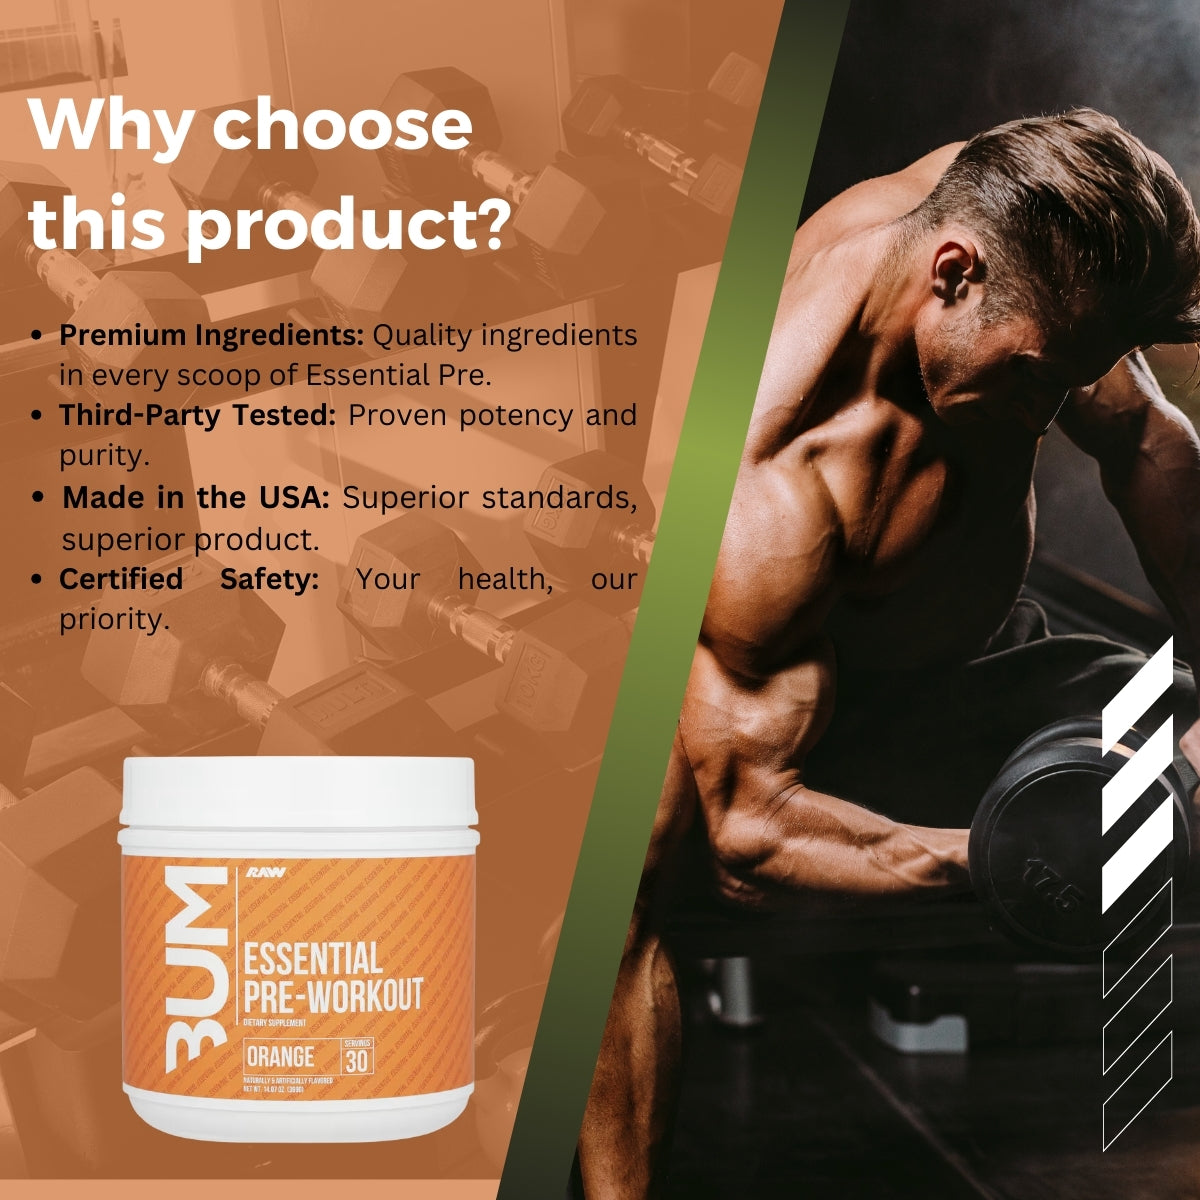 Raw Nutrition Bum, Essential Pre Workout - Why choose